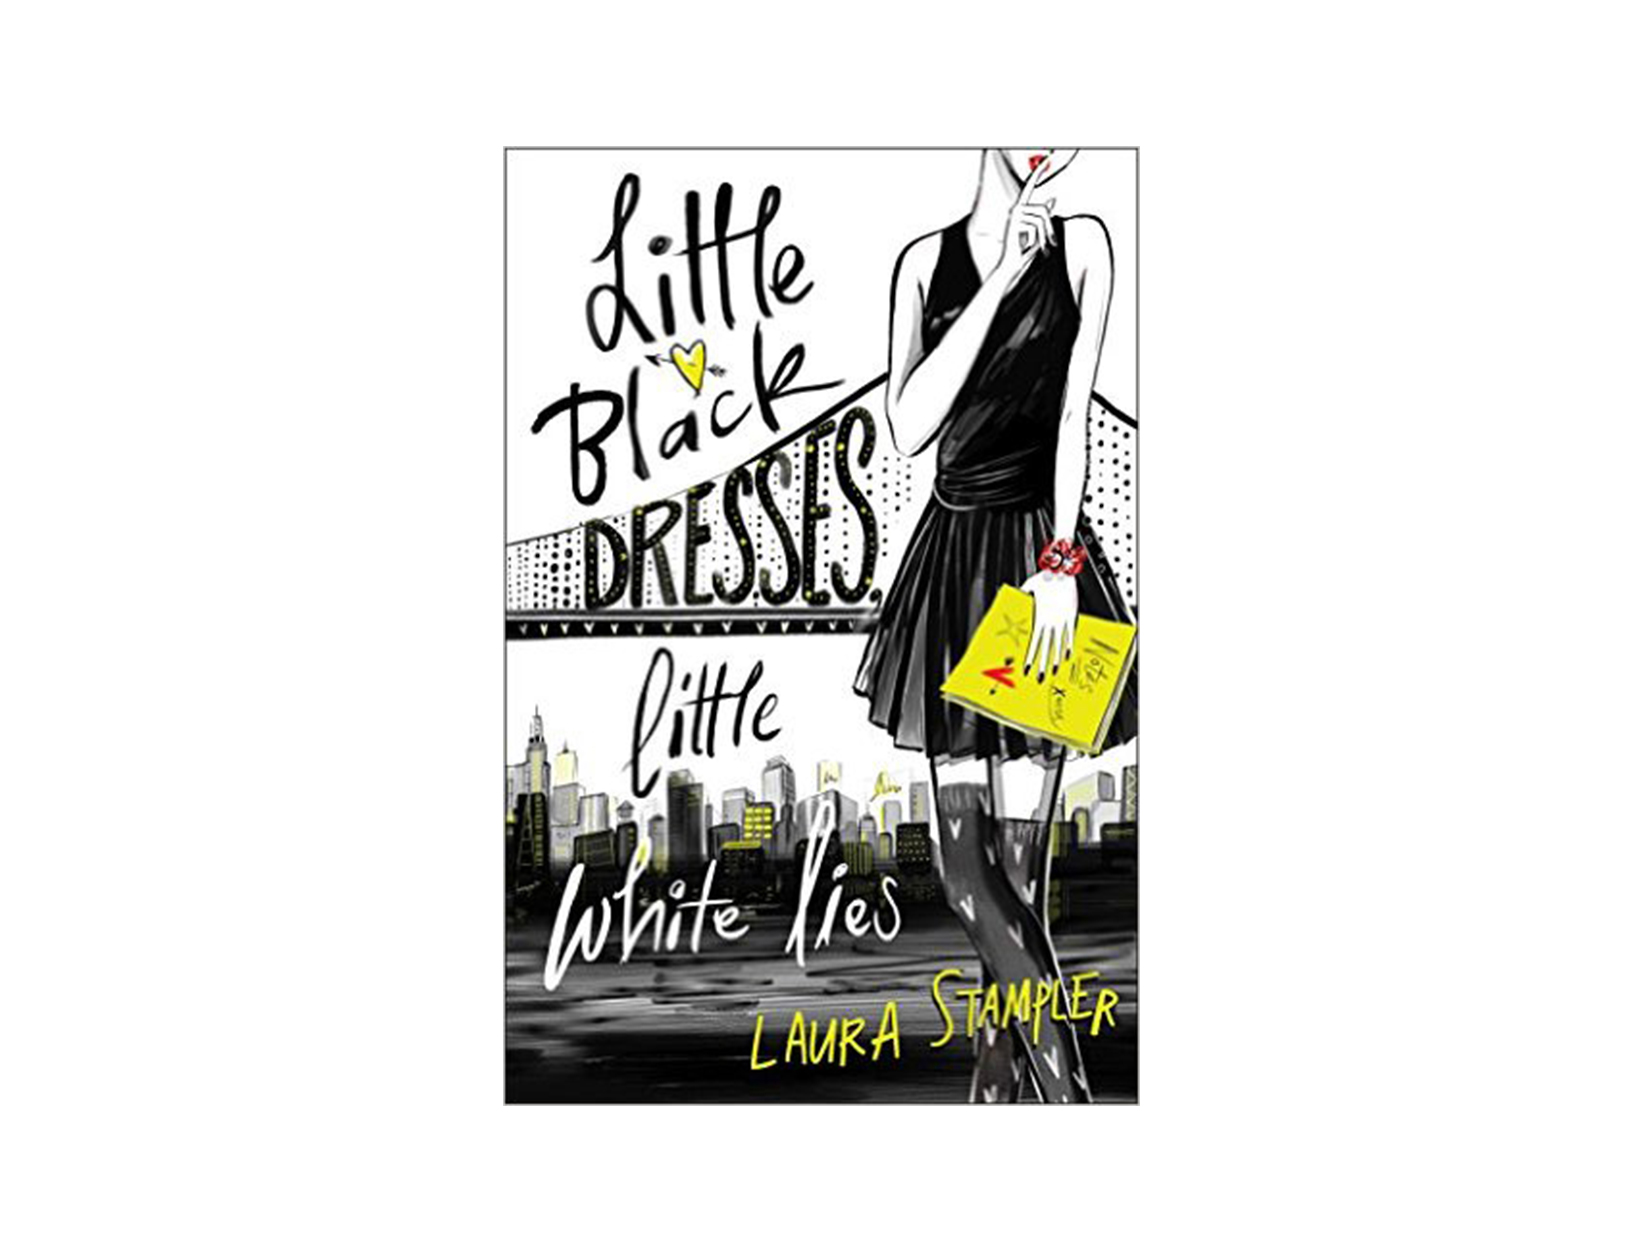 Little Black Dresses, Little White Lies by Laura Stampler